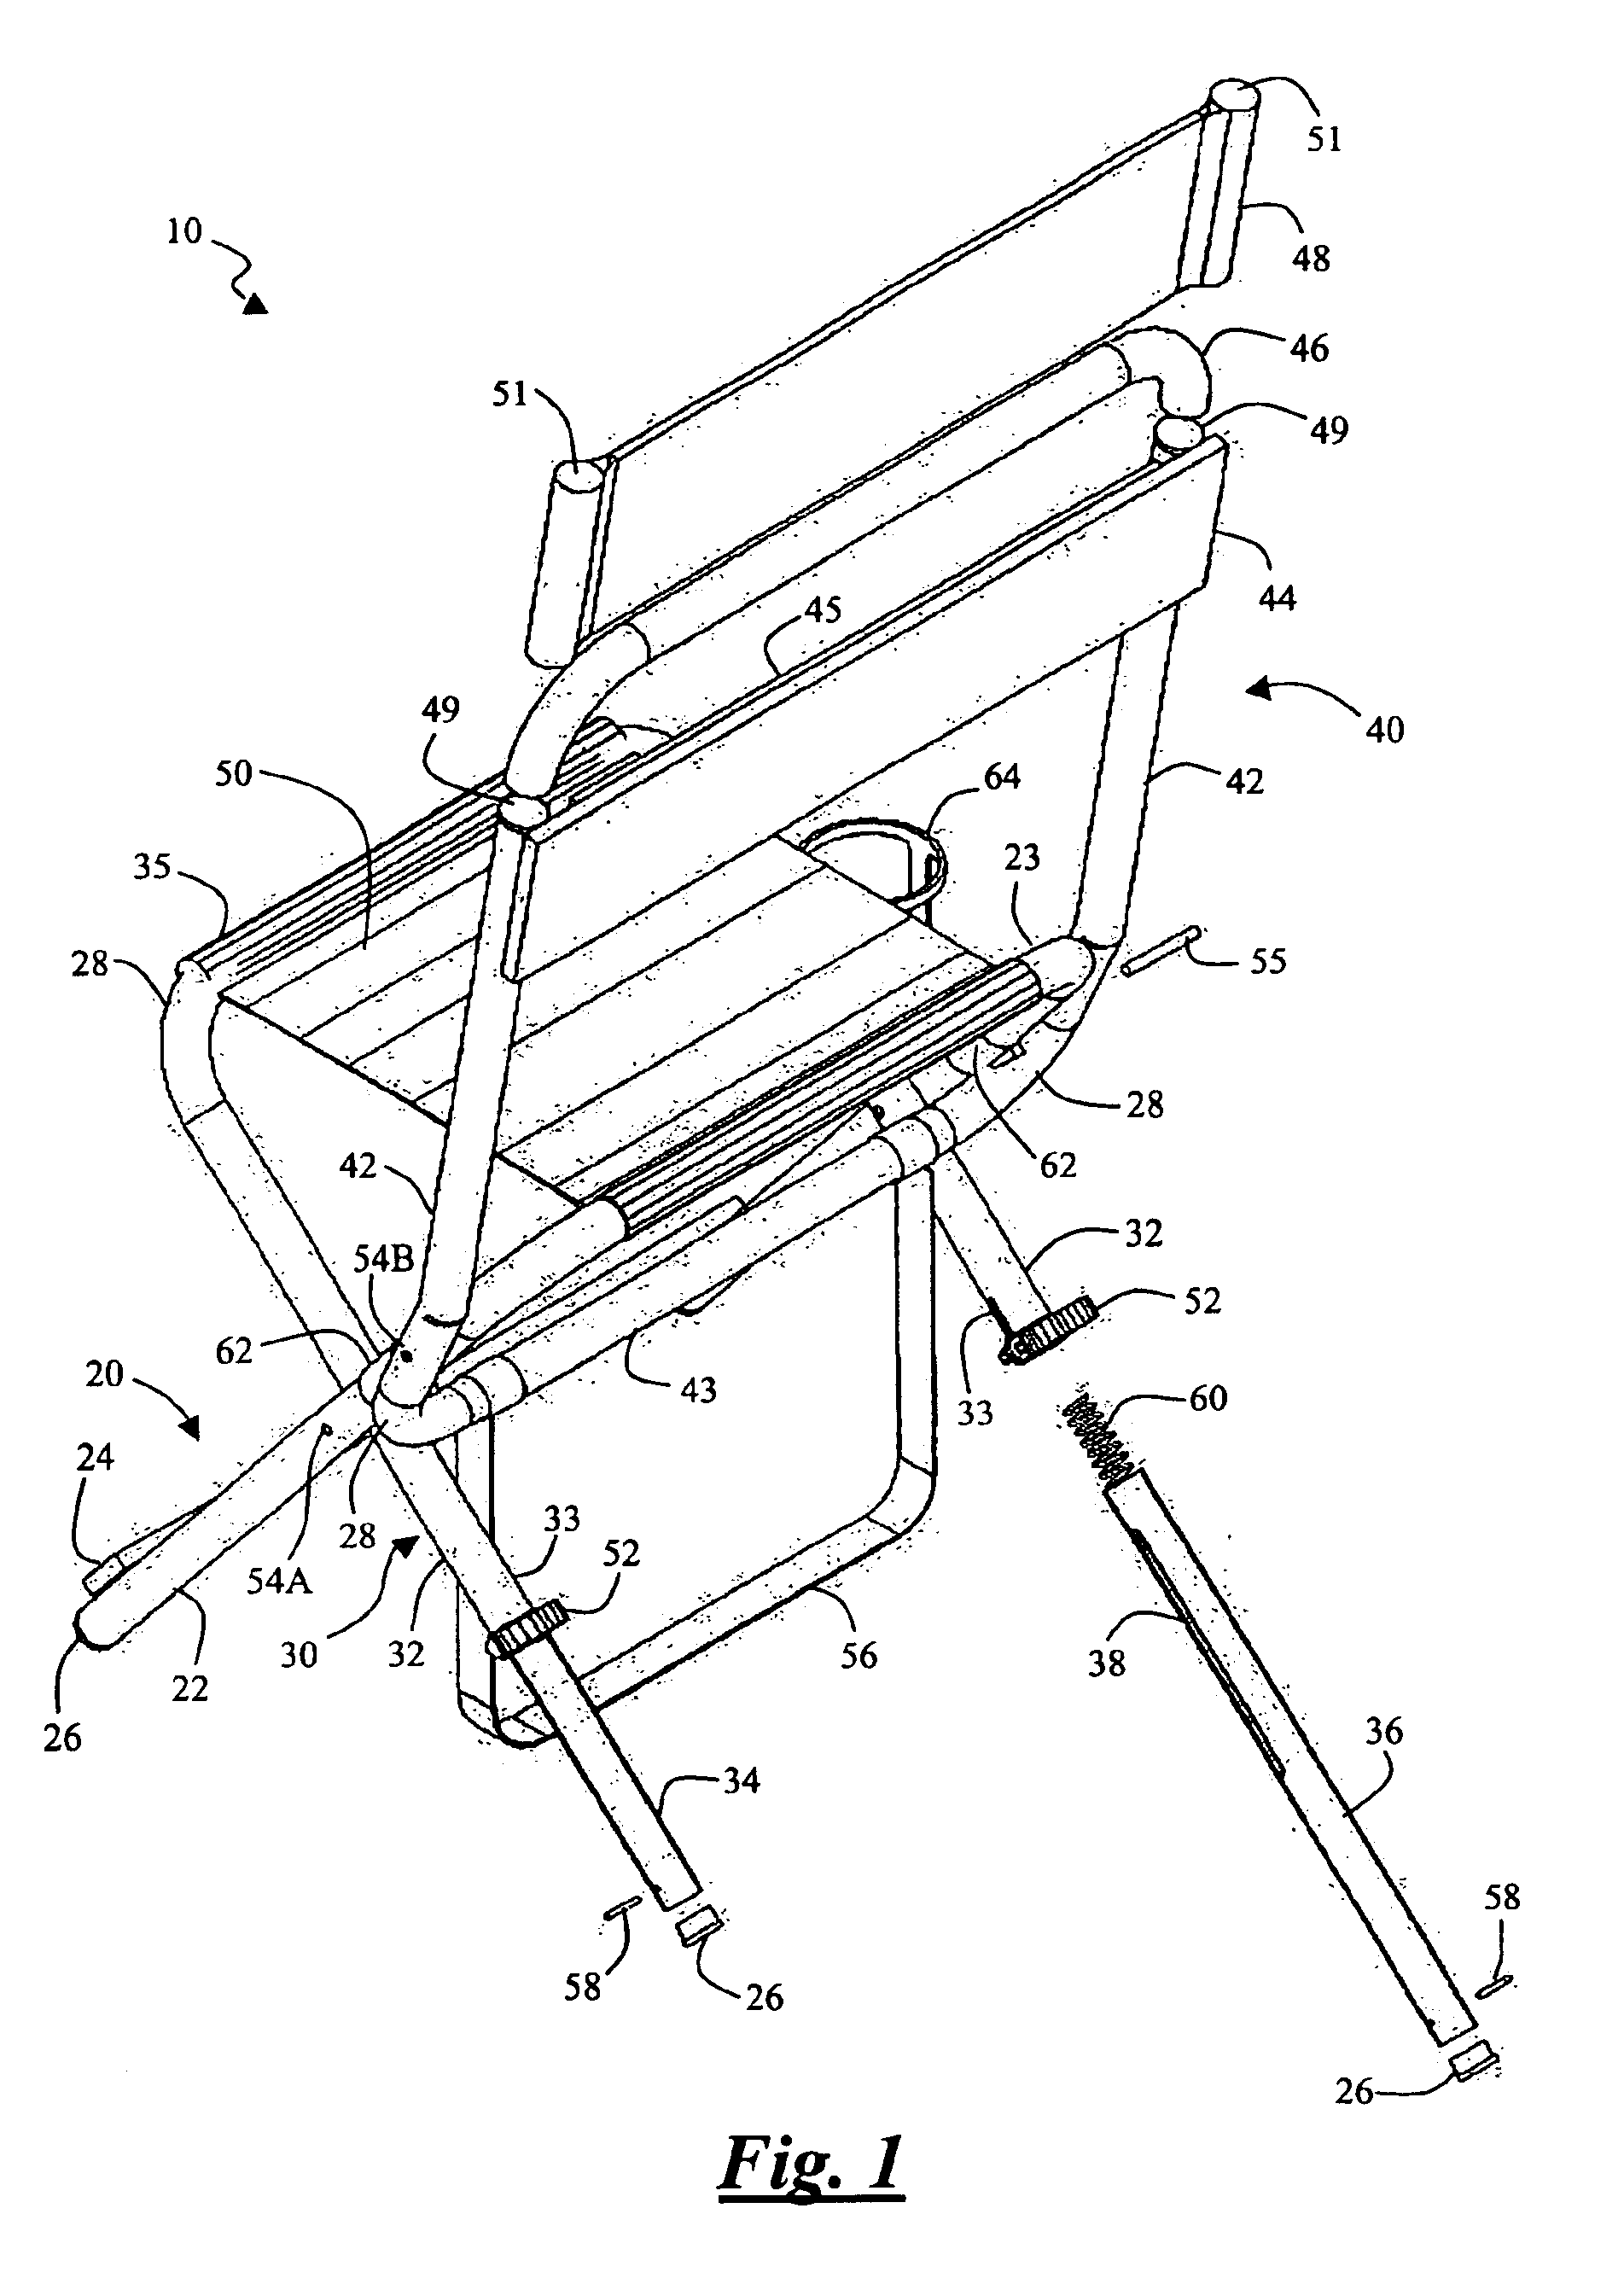 Continuously adjustable lawn furniture having tubular construction